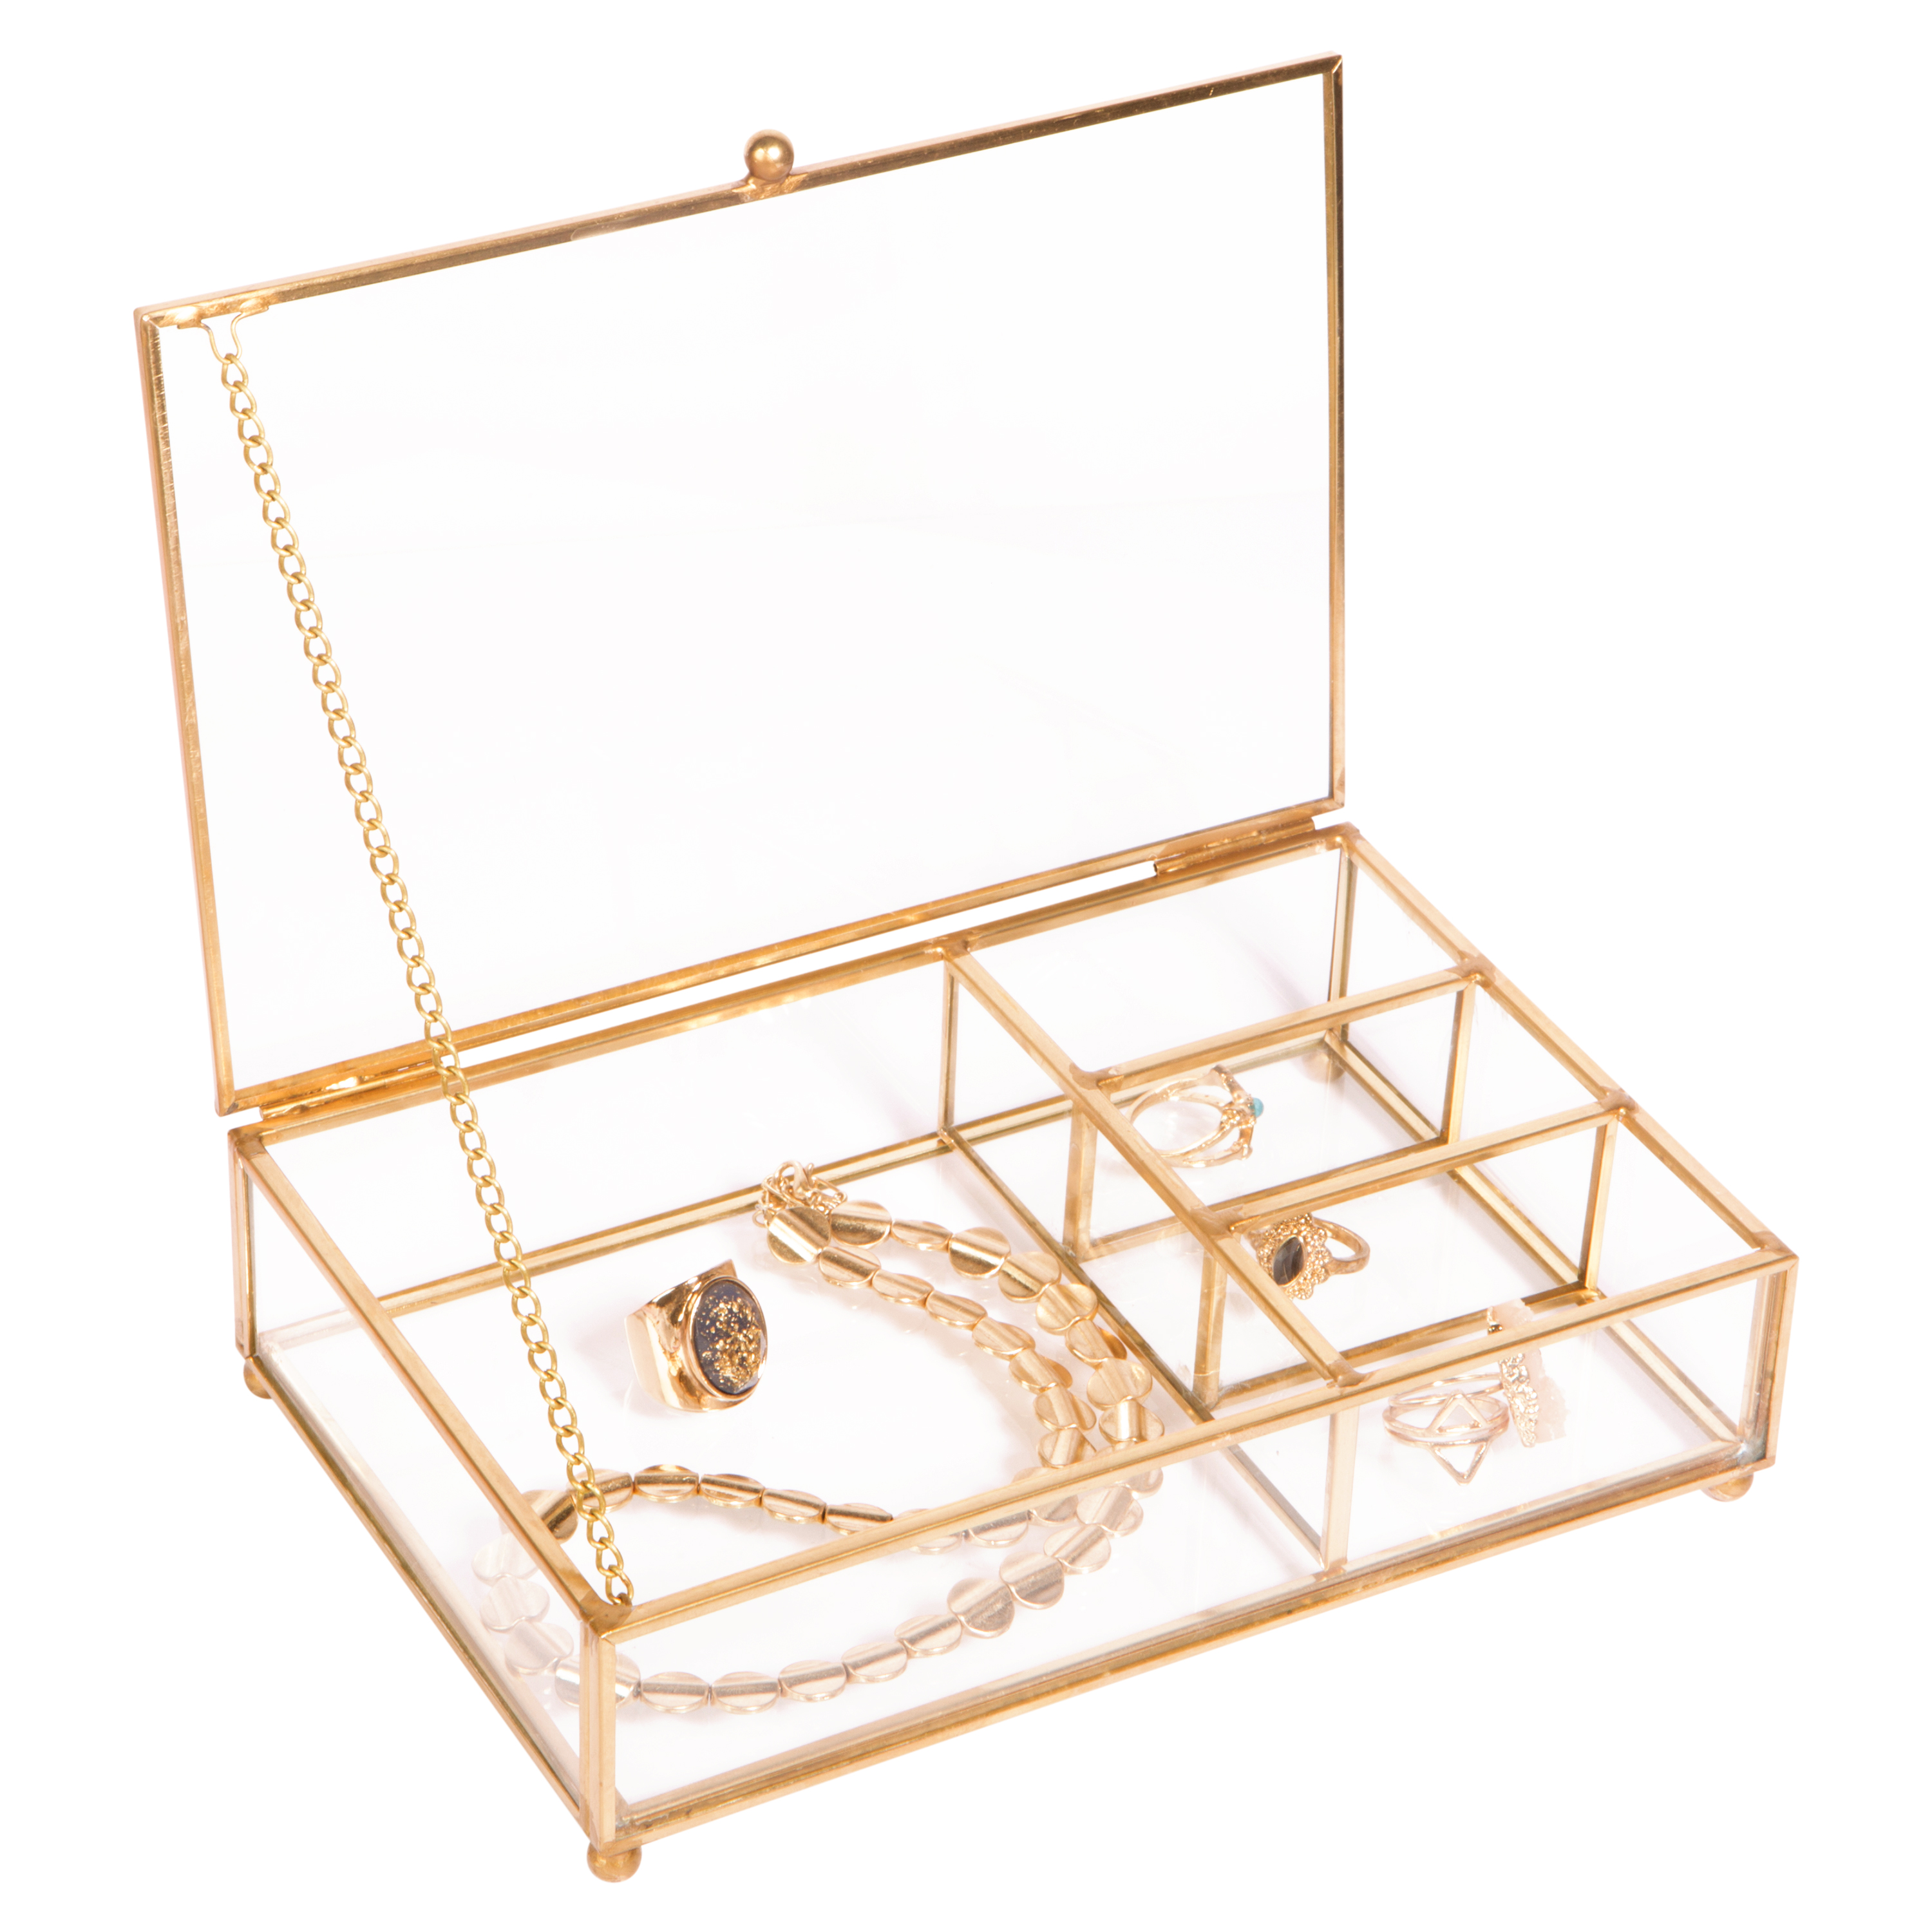 Home Details Vintage 4 Compartment Glass Unisex Cosmetic & Jewelry Keepsake Box in Gold - image 3 of 4